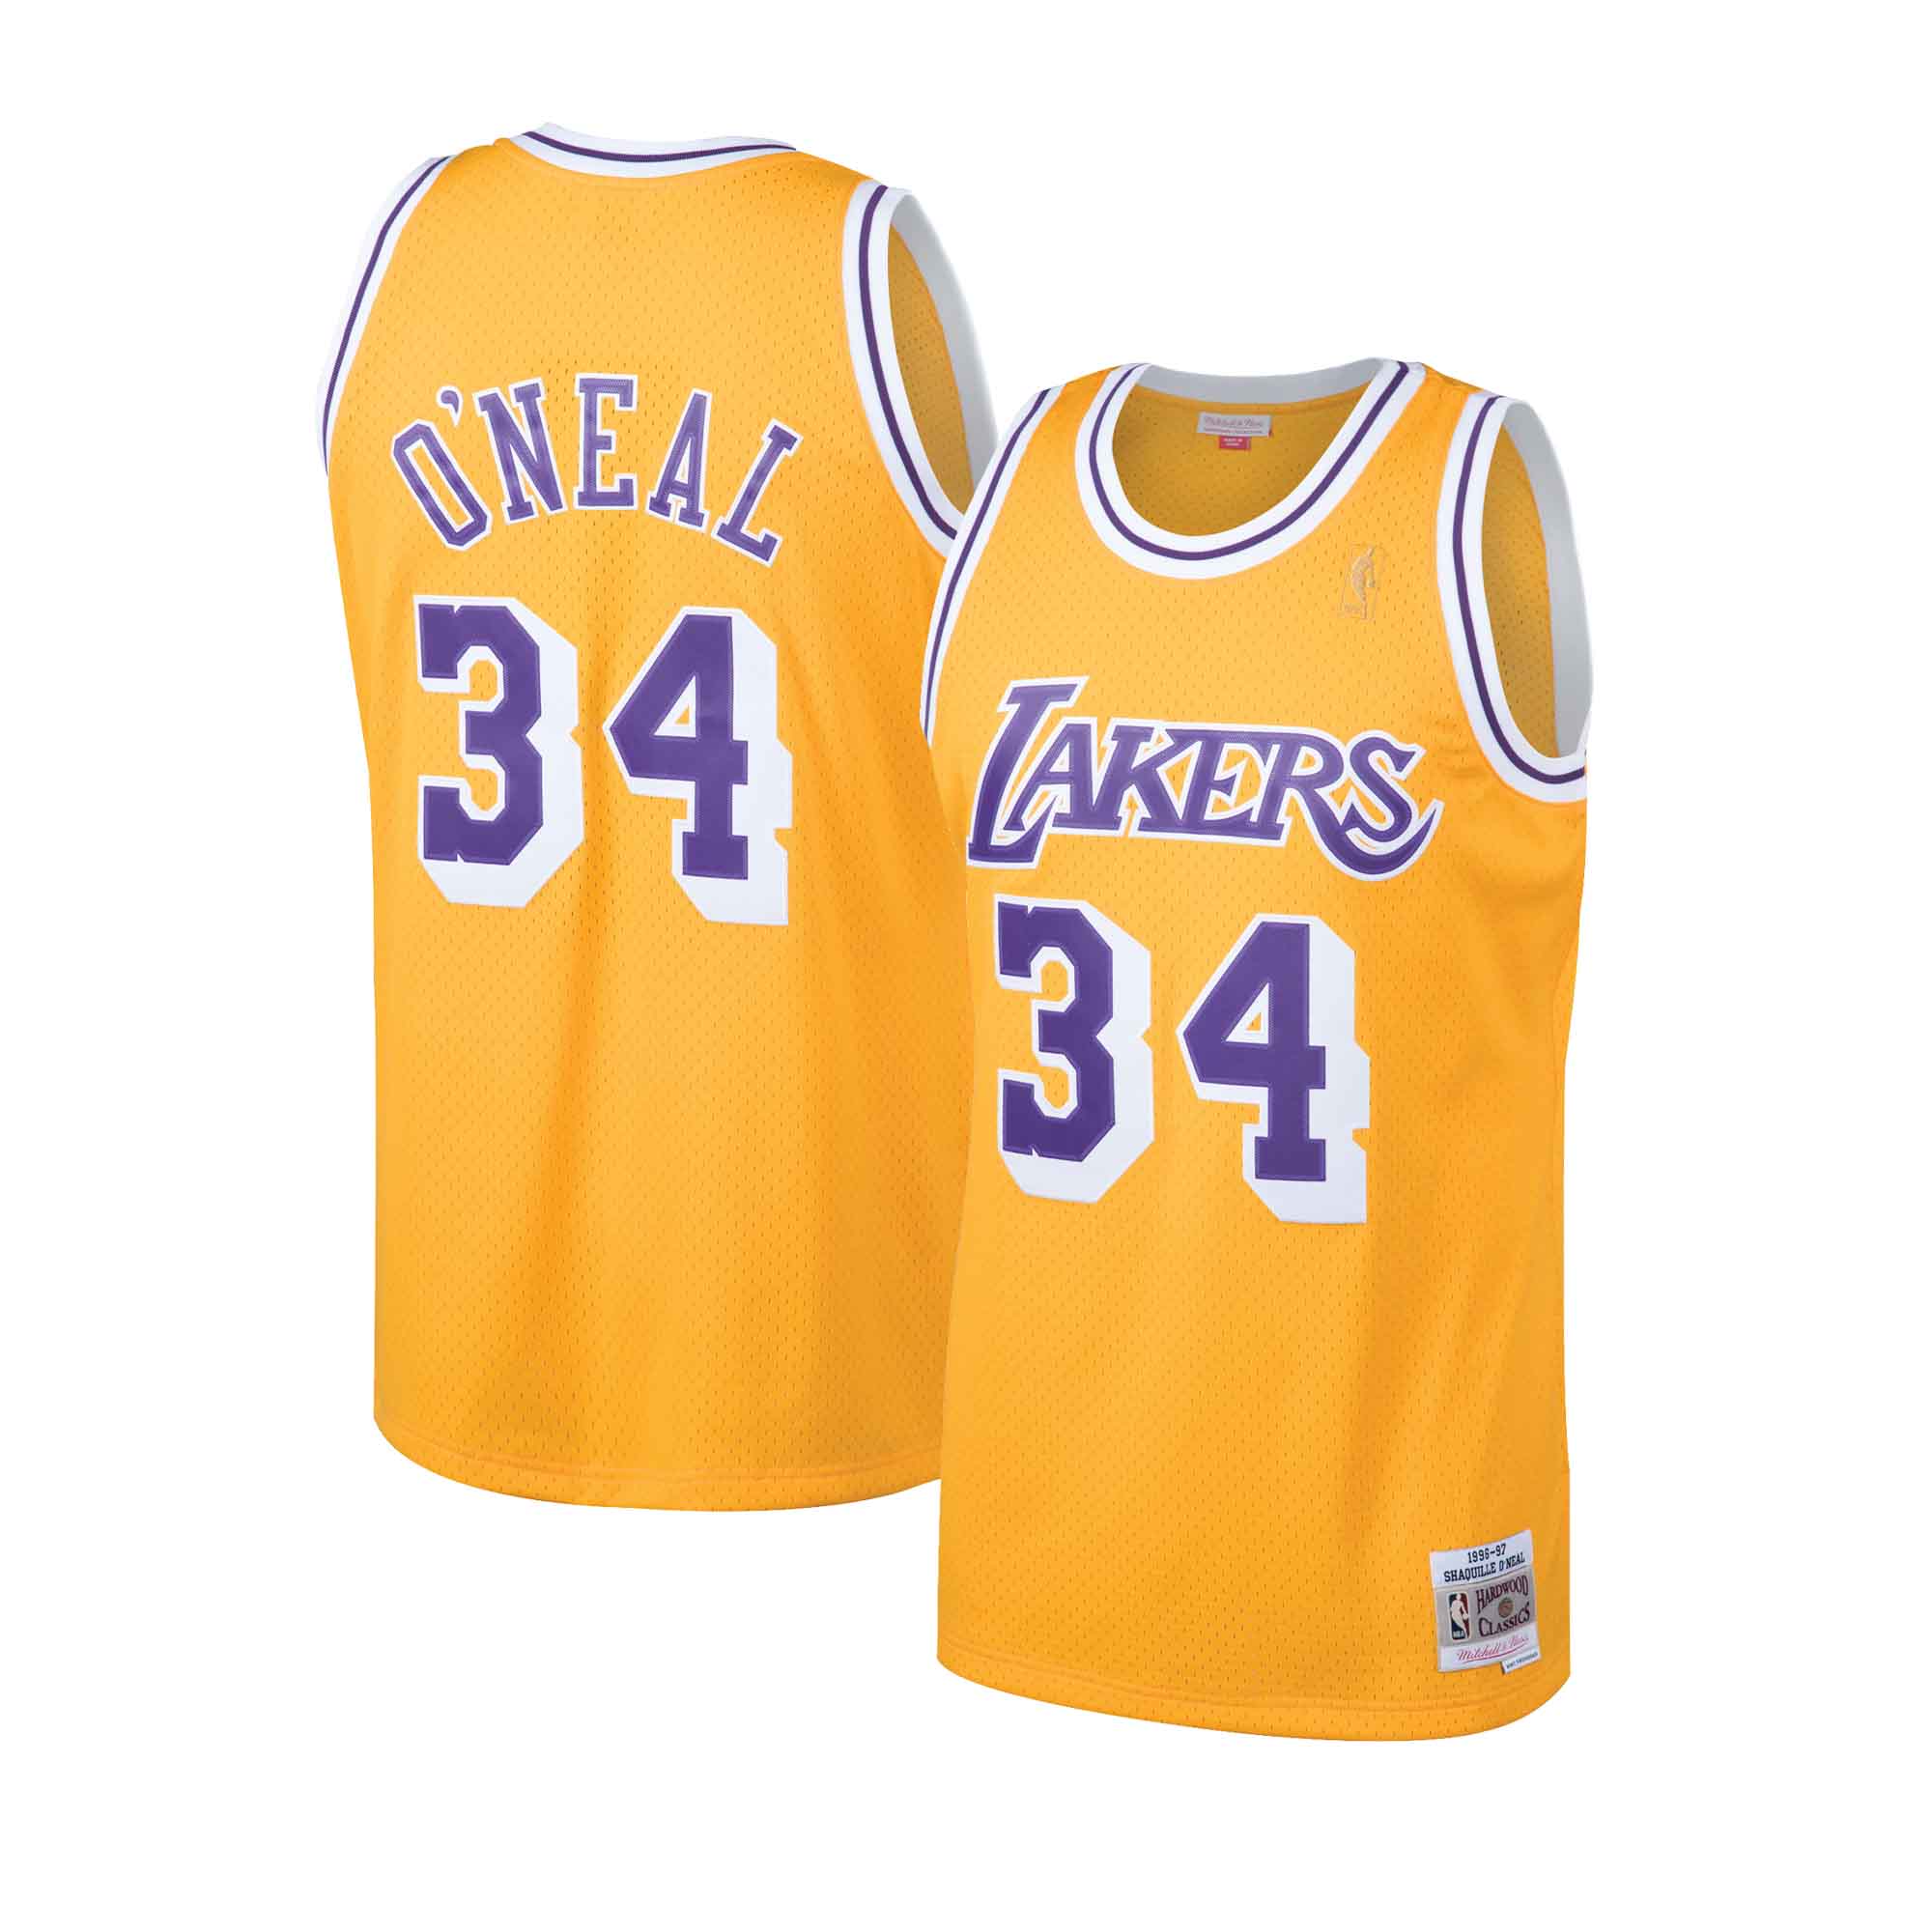 Shaquille O'Neal Los Angeles Lakers Men's 1999-00 Home Swingman Jersey  (4X-Large) Yellow